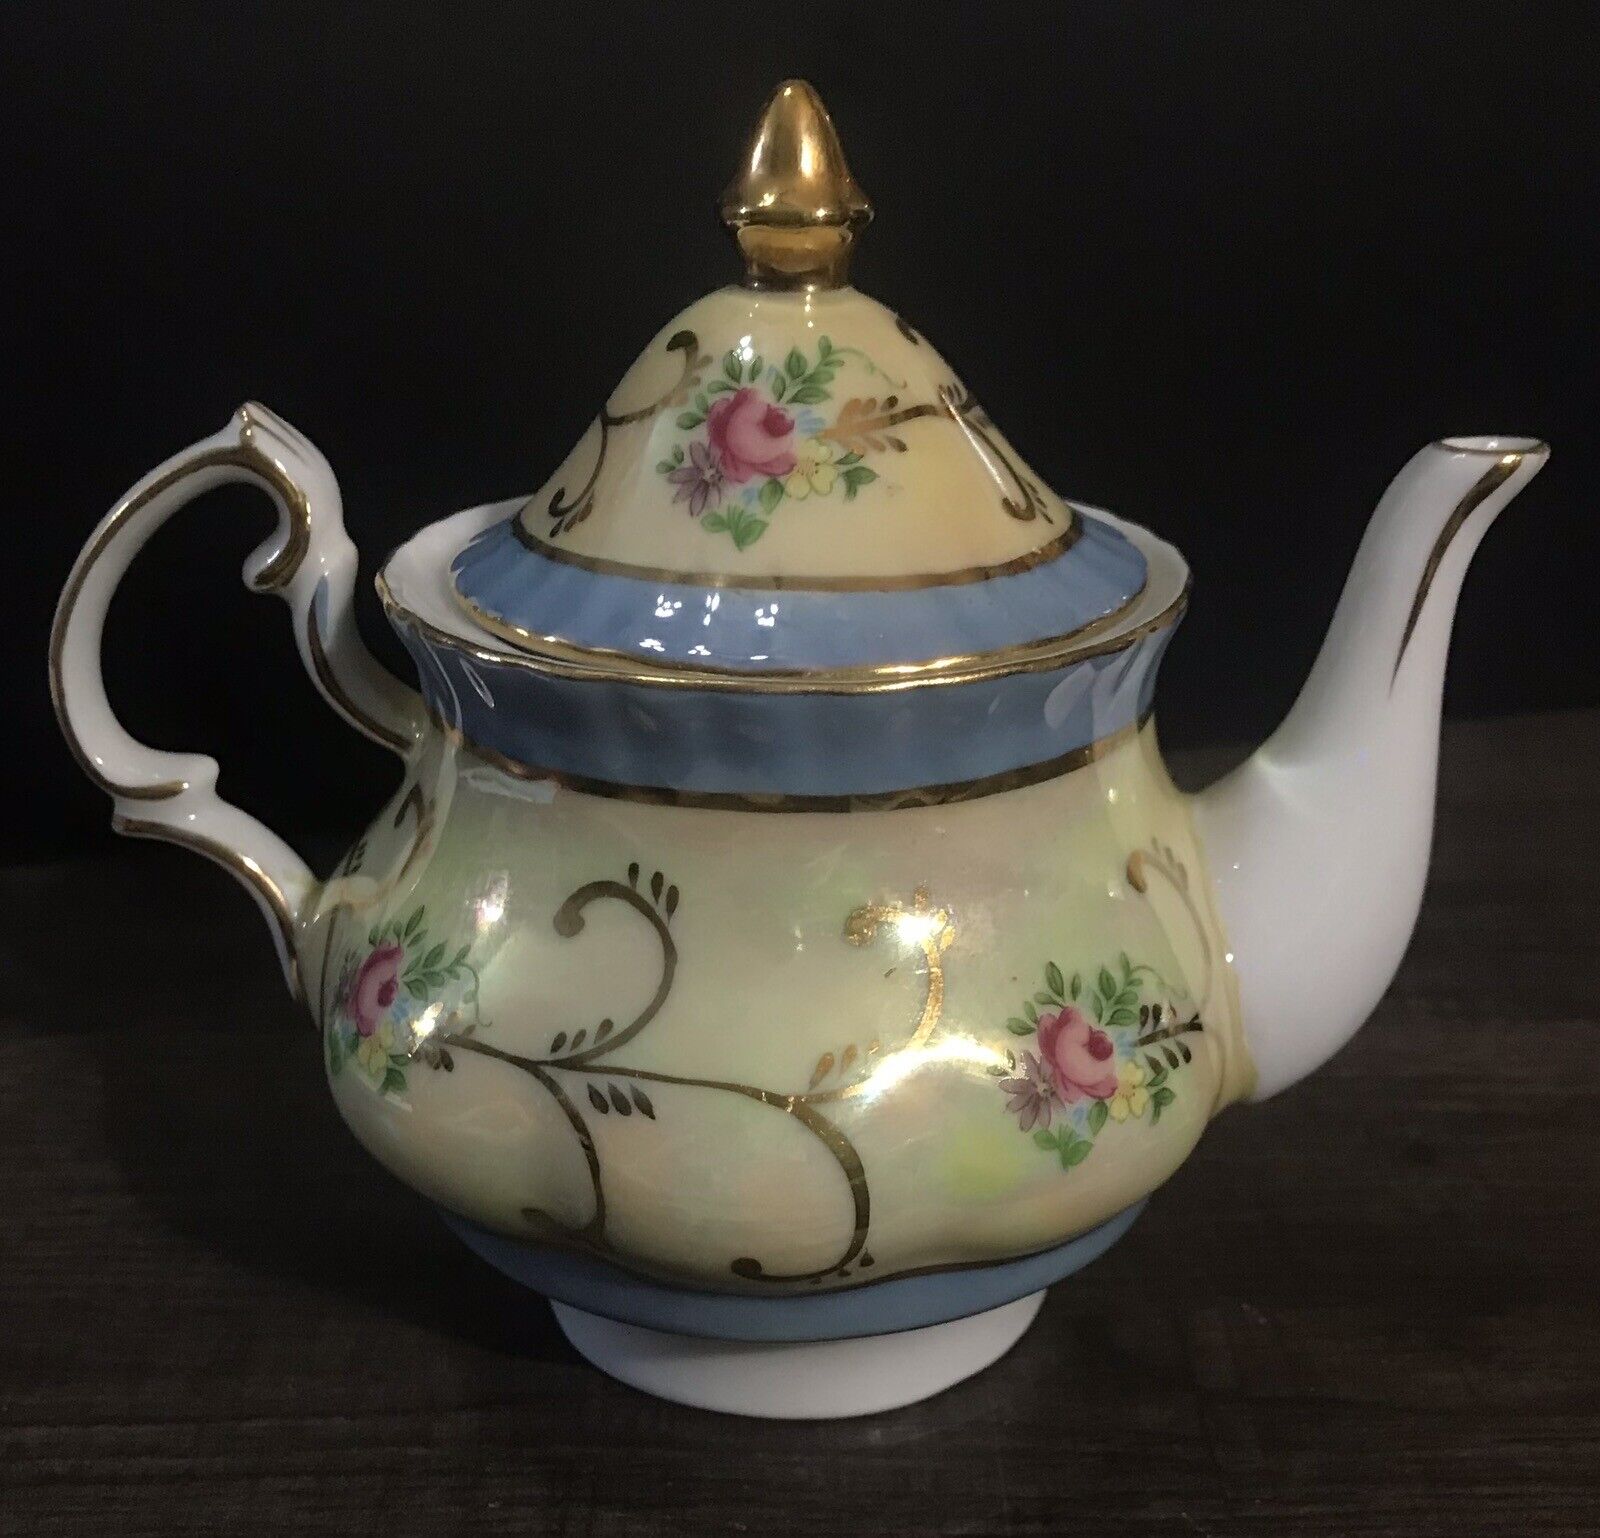 Stunning Iridescent Floral Decorative Tea Pot with Lid Gold Accents D.N. & E.I.